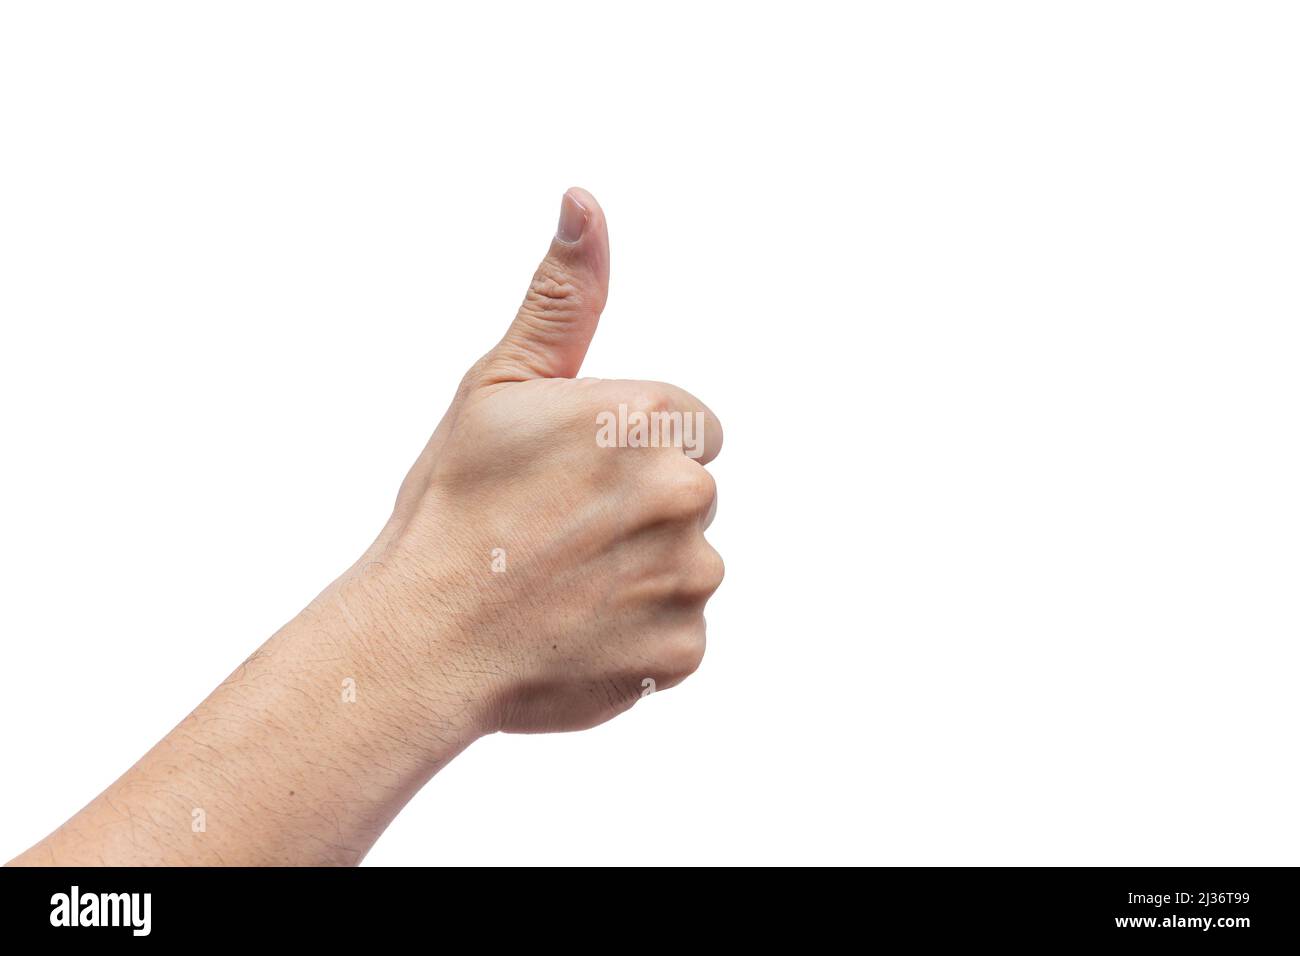 hand sign thumbs up like good approved pass gesture isolated on white background. Stock Photo